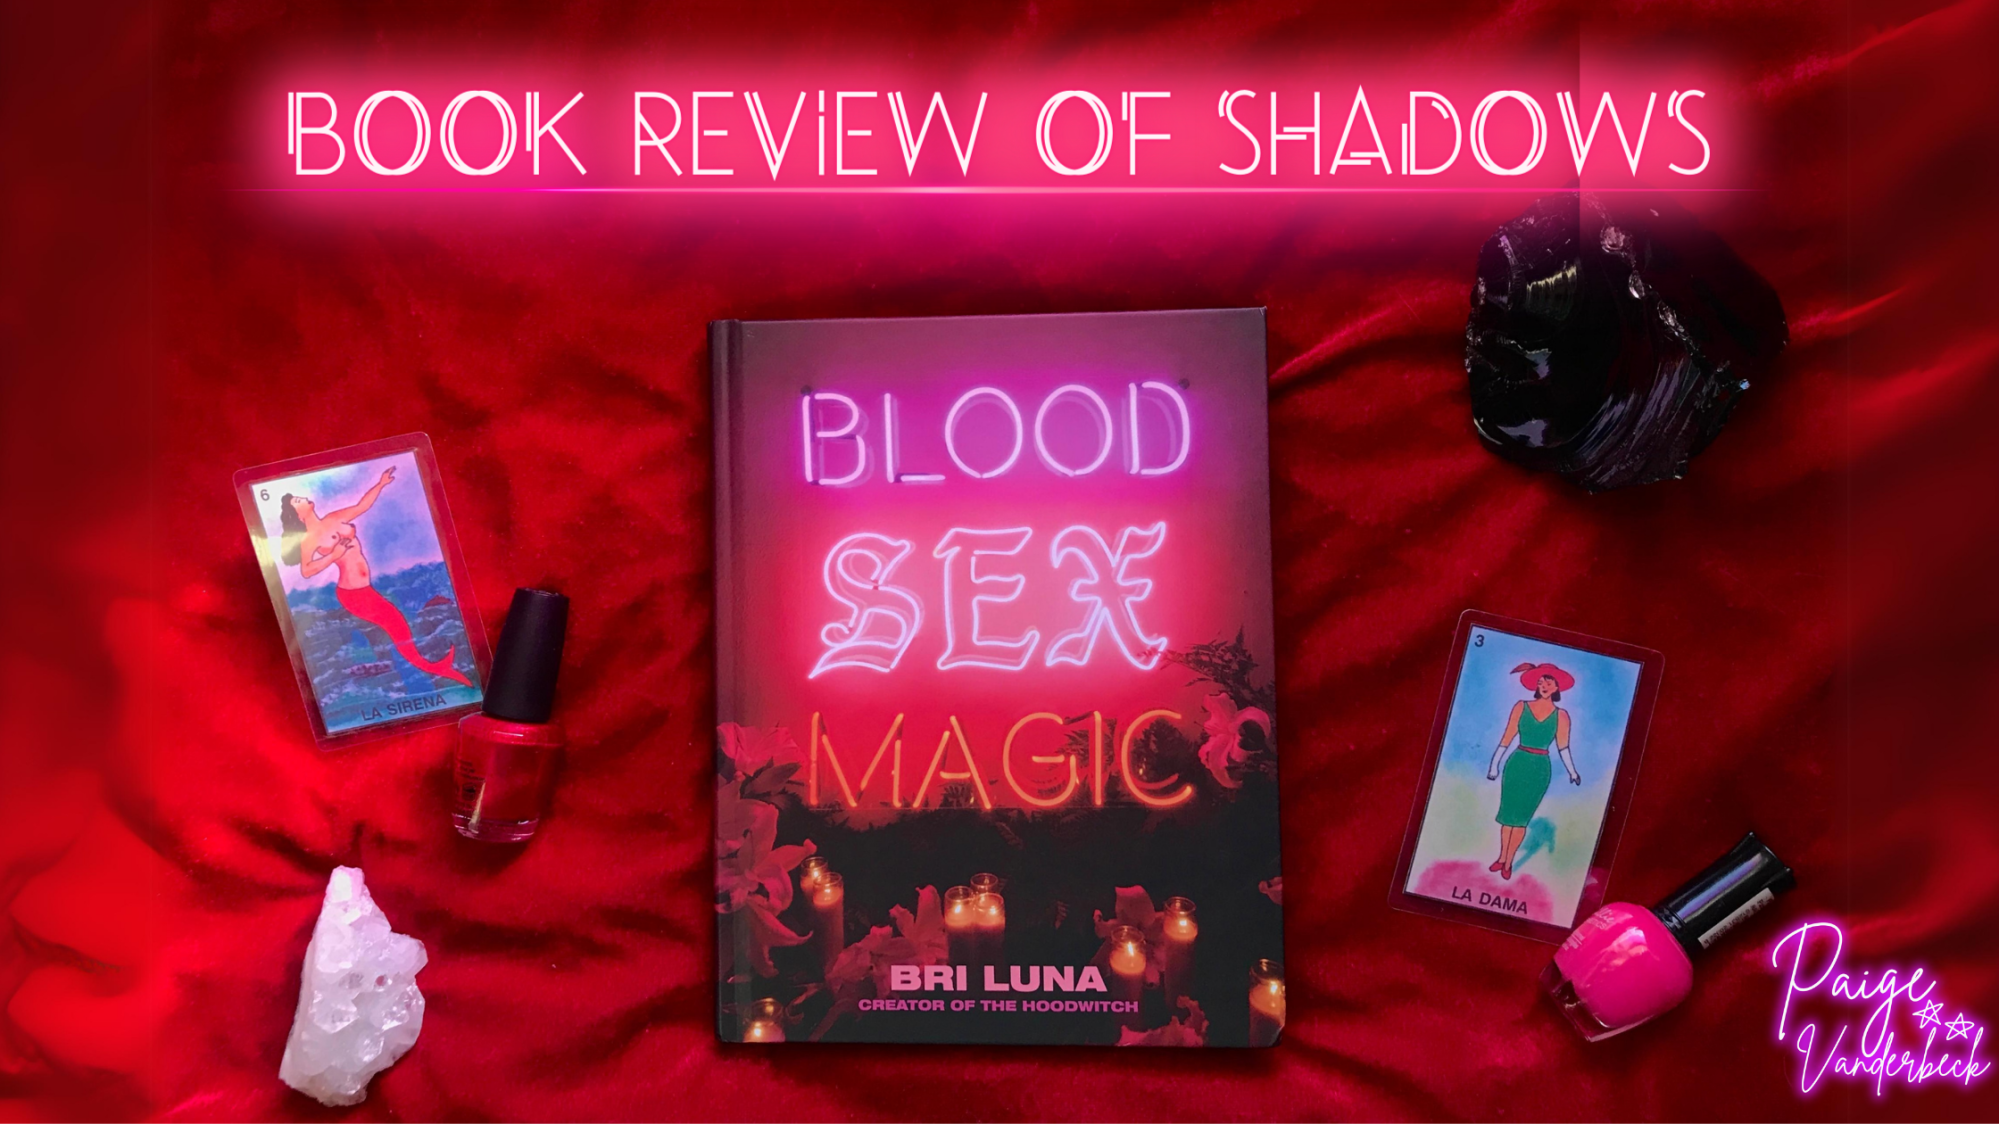 Blood Sex Magic by Bri Luna  Book Review of Shadows – Paige Vanderbeck, The  Fat Feminist Witch